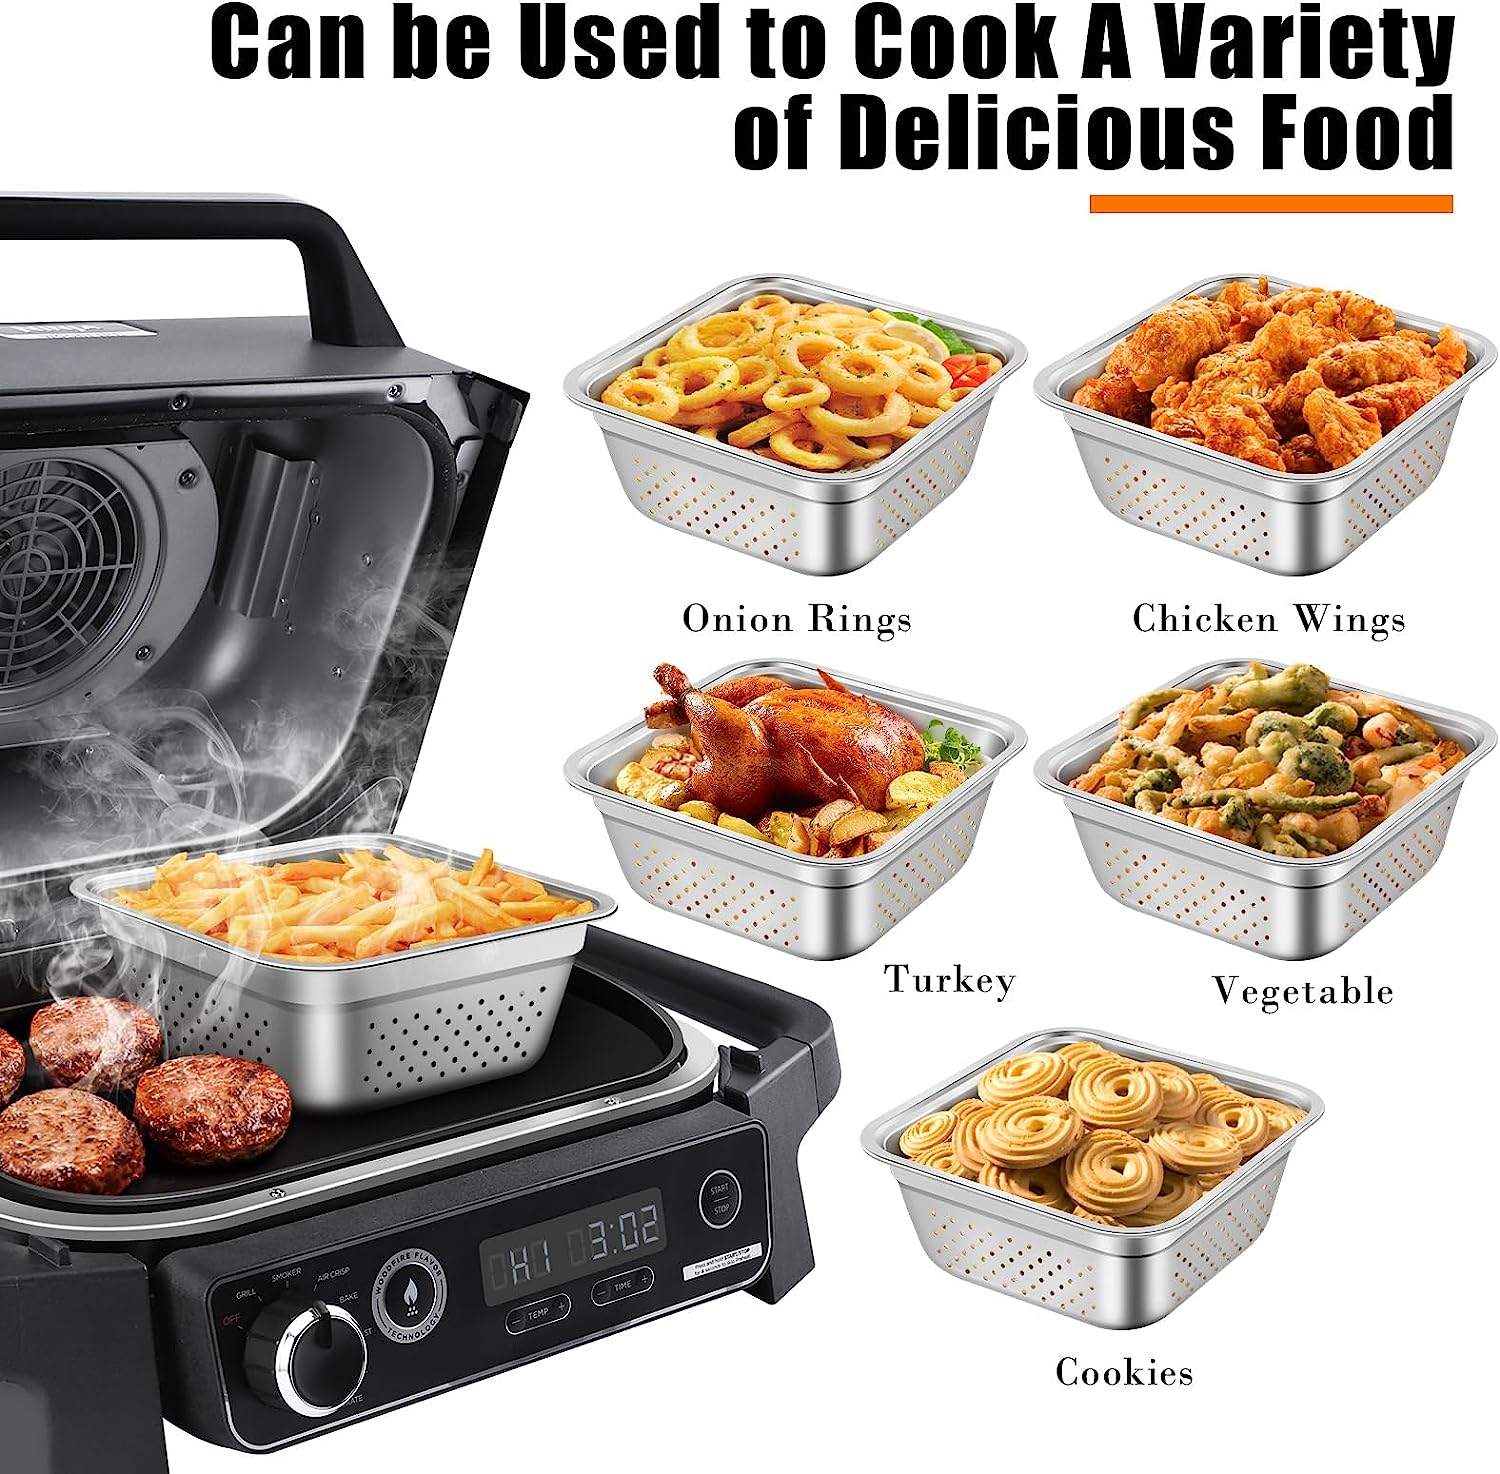 Crisper Tray Crisping Grill Basket Air Fryer Basket and Tray 304 Stainless Steel Crisper Pan